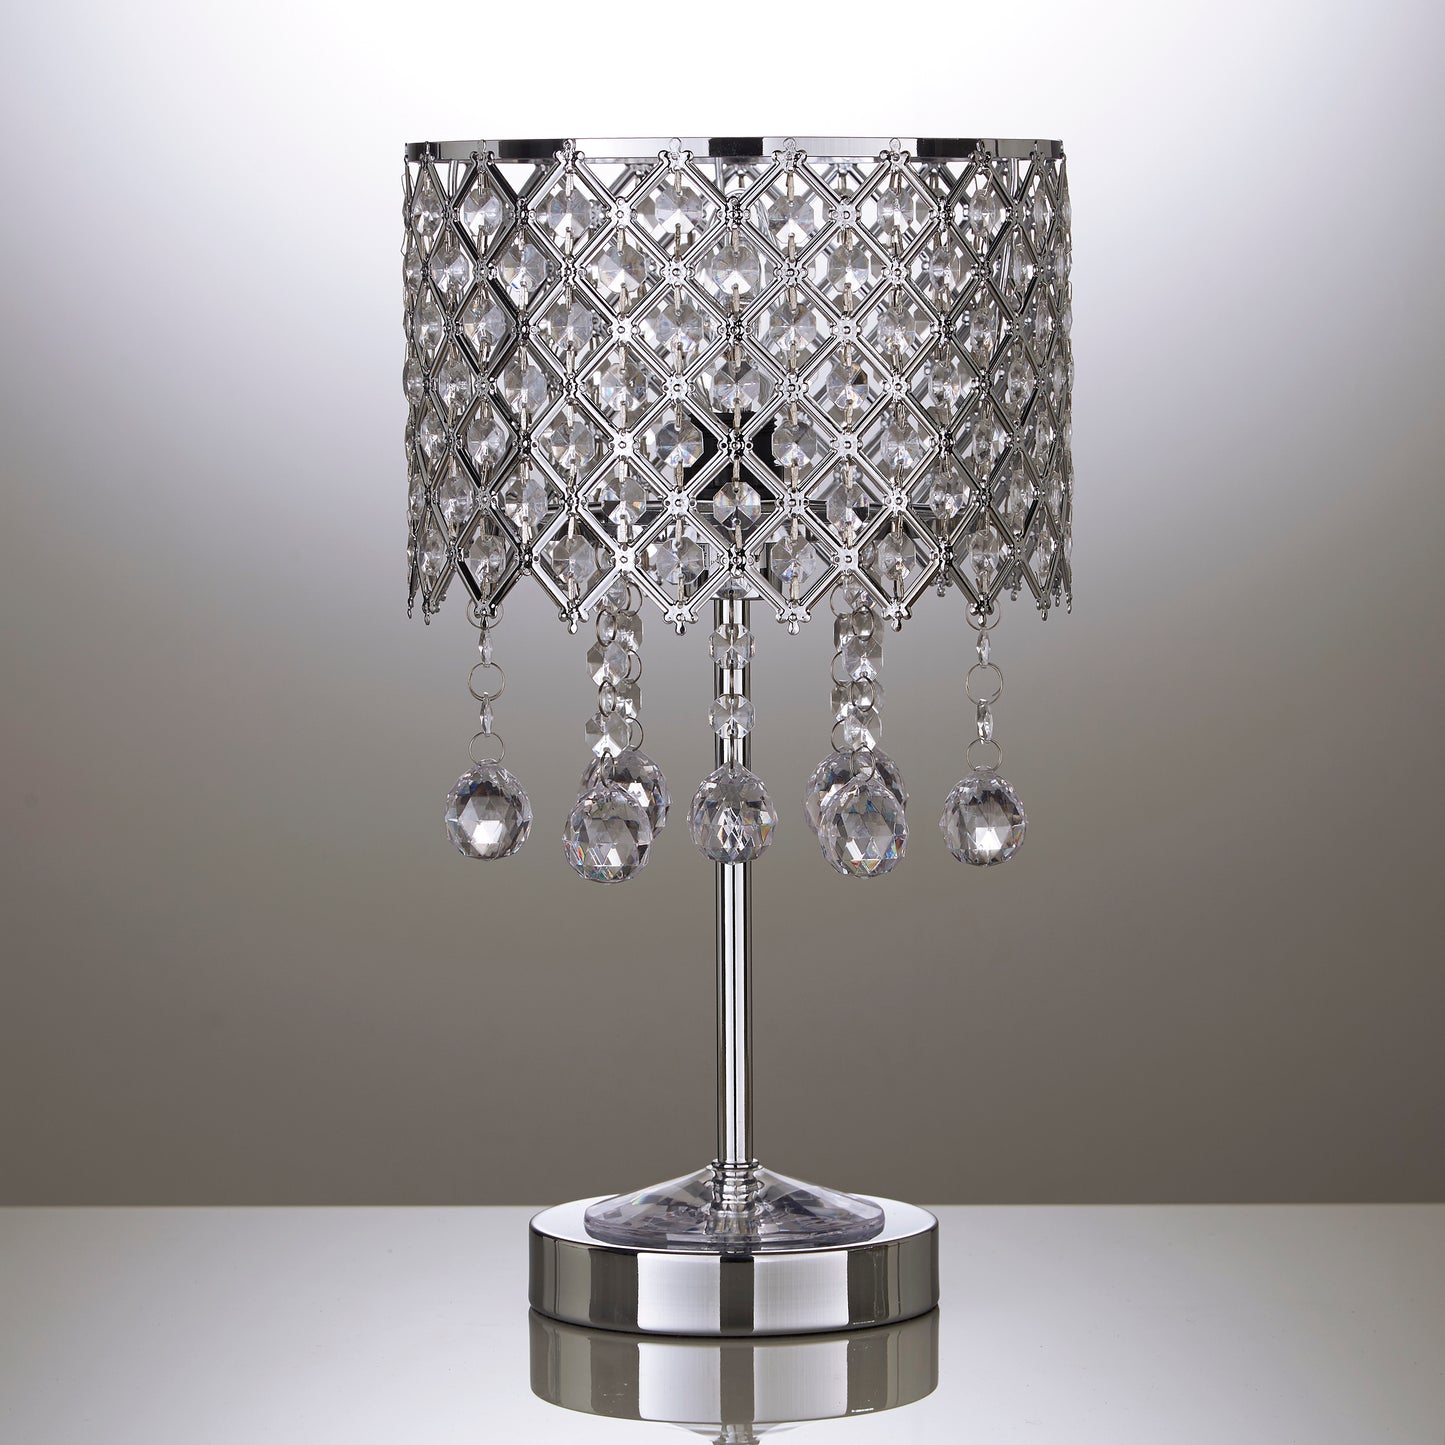 Silver Chrome Metal Table Lamp with Beaded Droplets and Beaded Lamps Shade